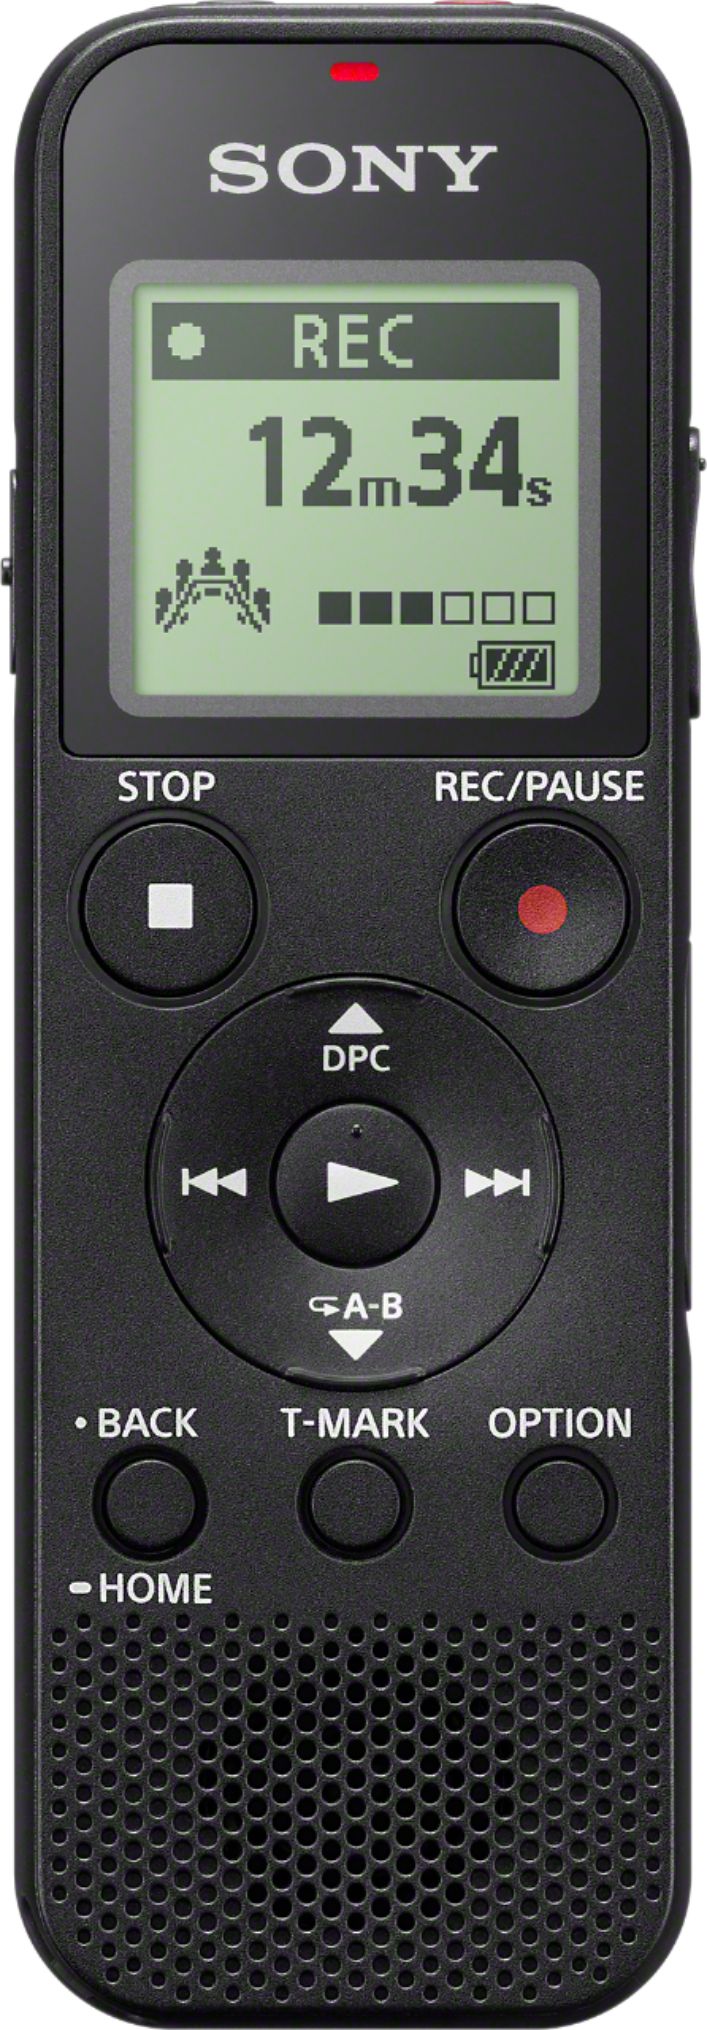 Sony ICDPX720 1024 MB, 280 Hours Handheld Digital Voice Recorder for sale online 